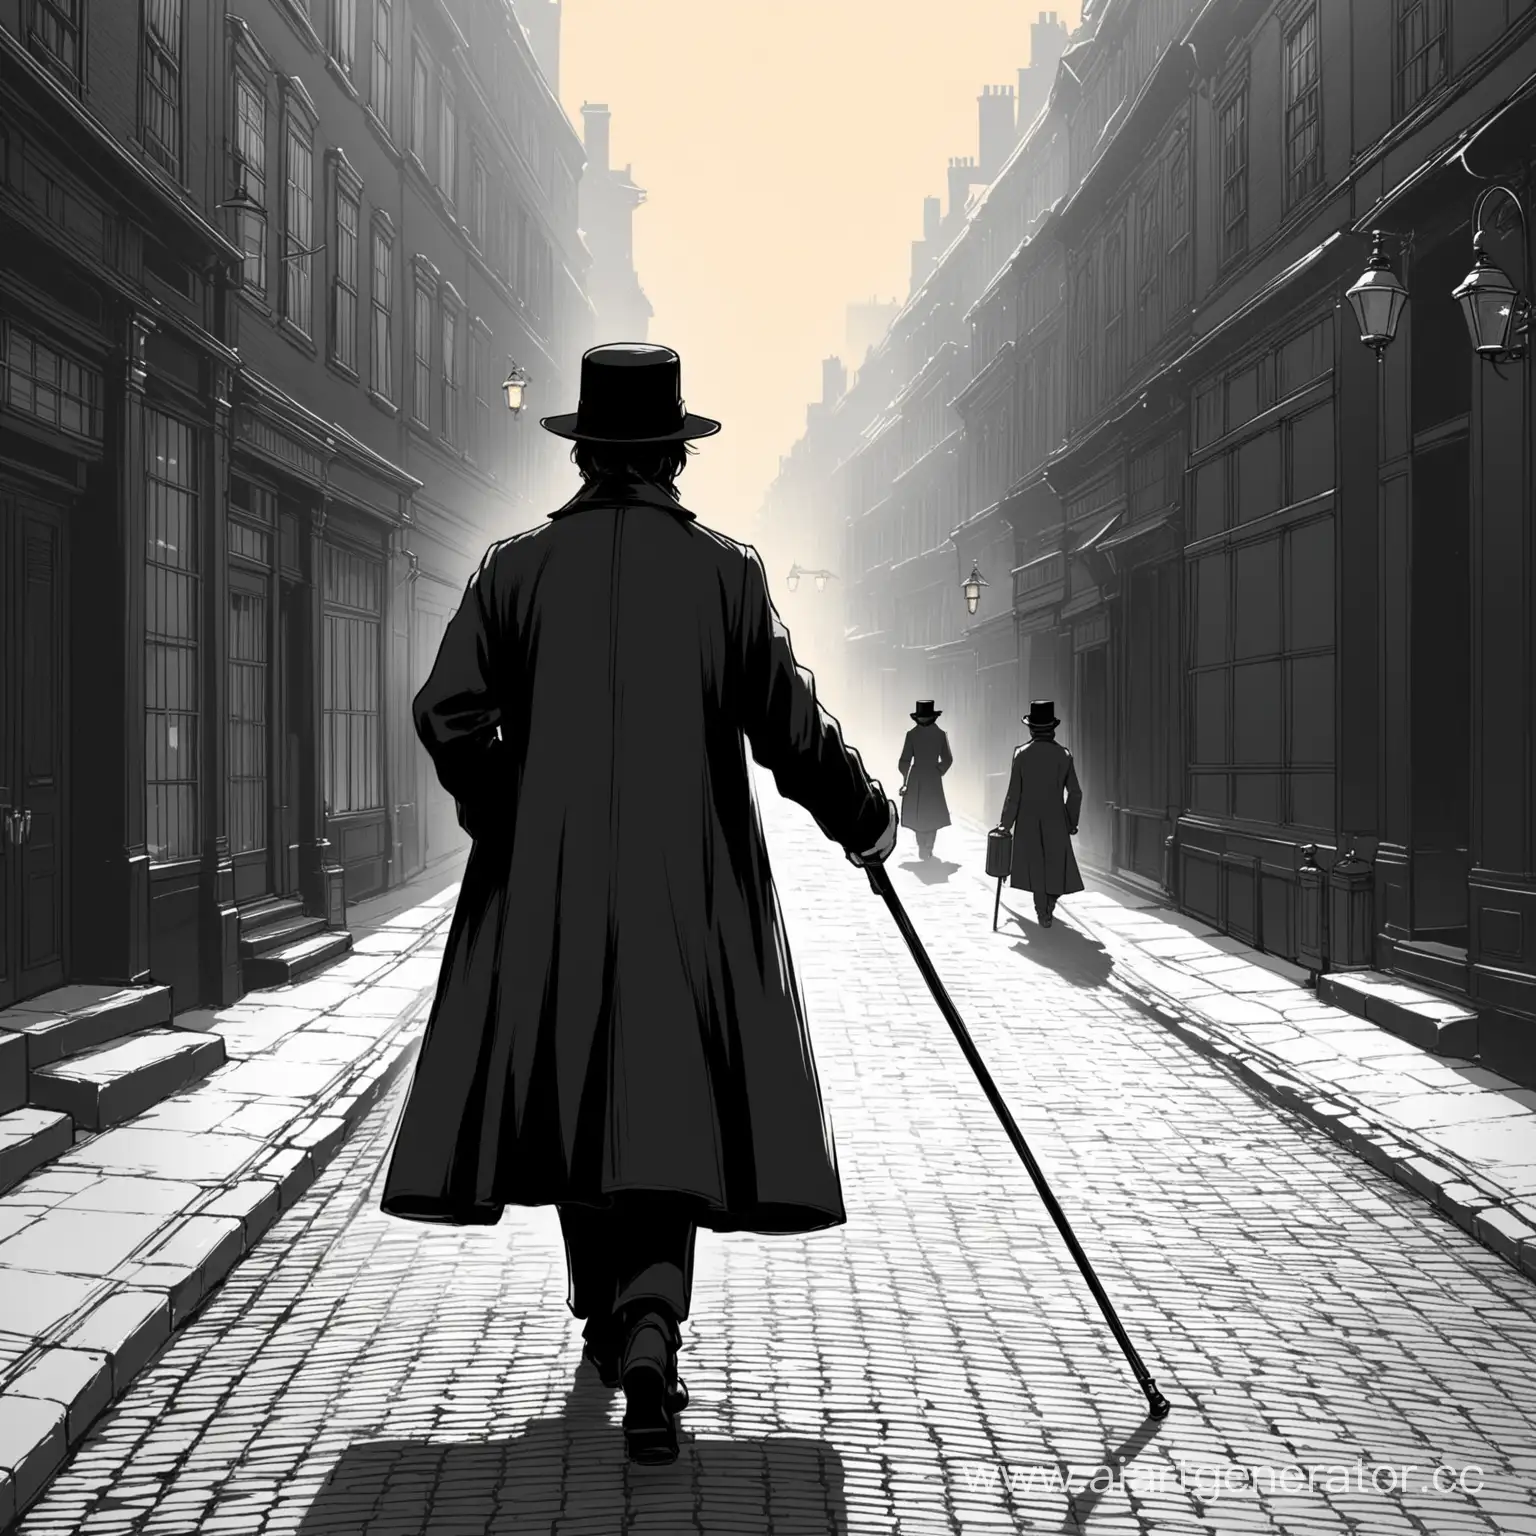 Elegant-Figure-Strolling-19th-Century-Urban-Street-in-Black-Hat-and-Coat-with-Cane